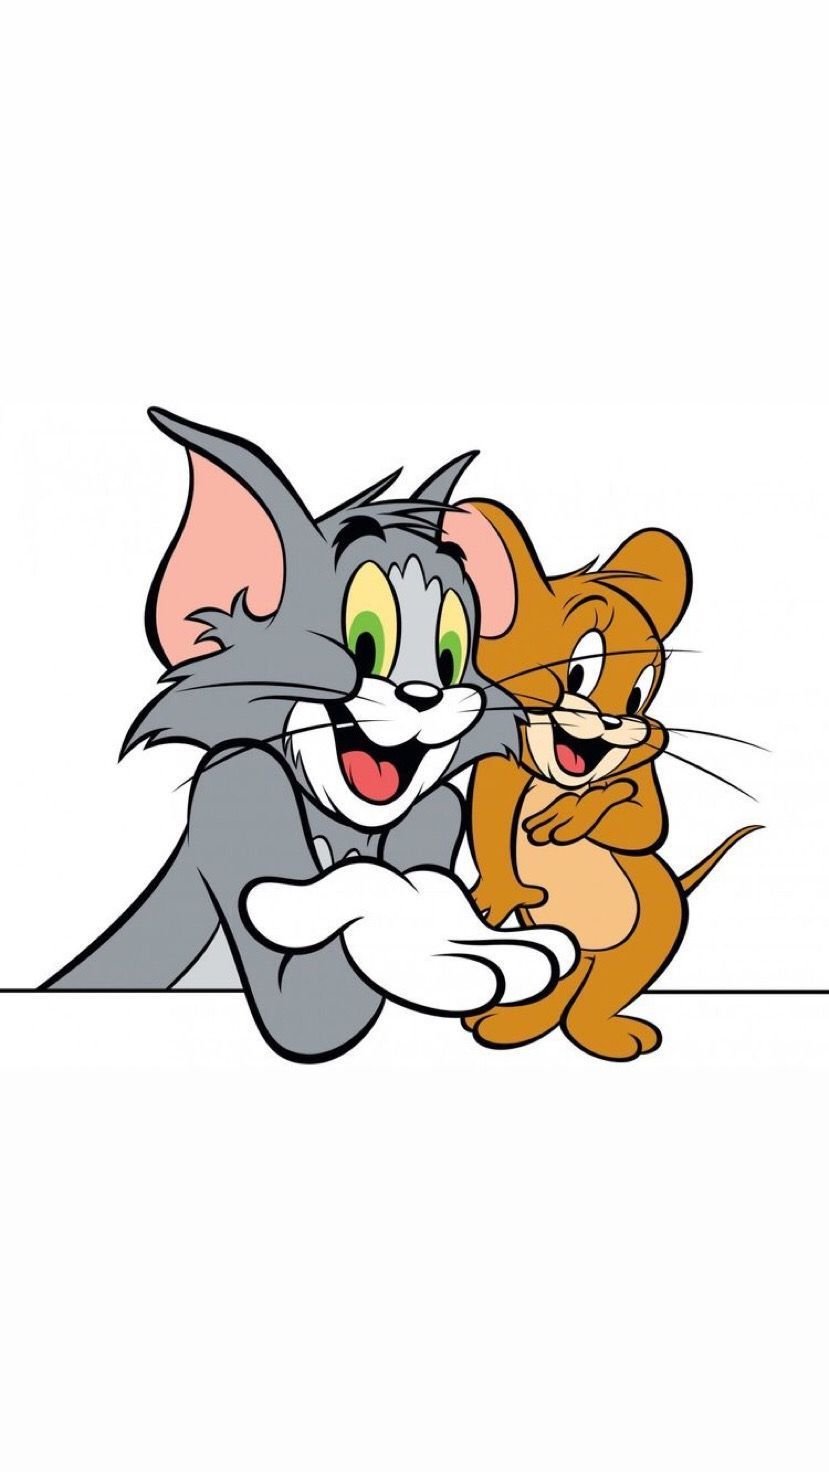 Tom gives Jerry a smooch 400k subs special  YouTube